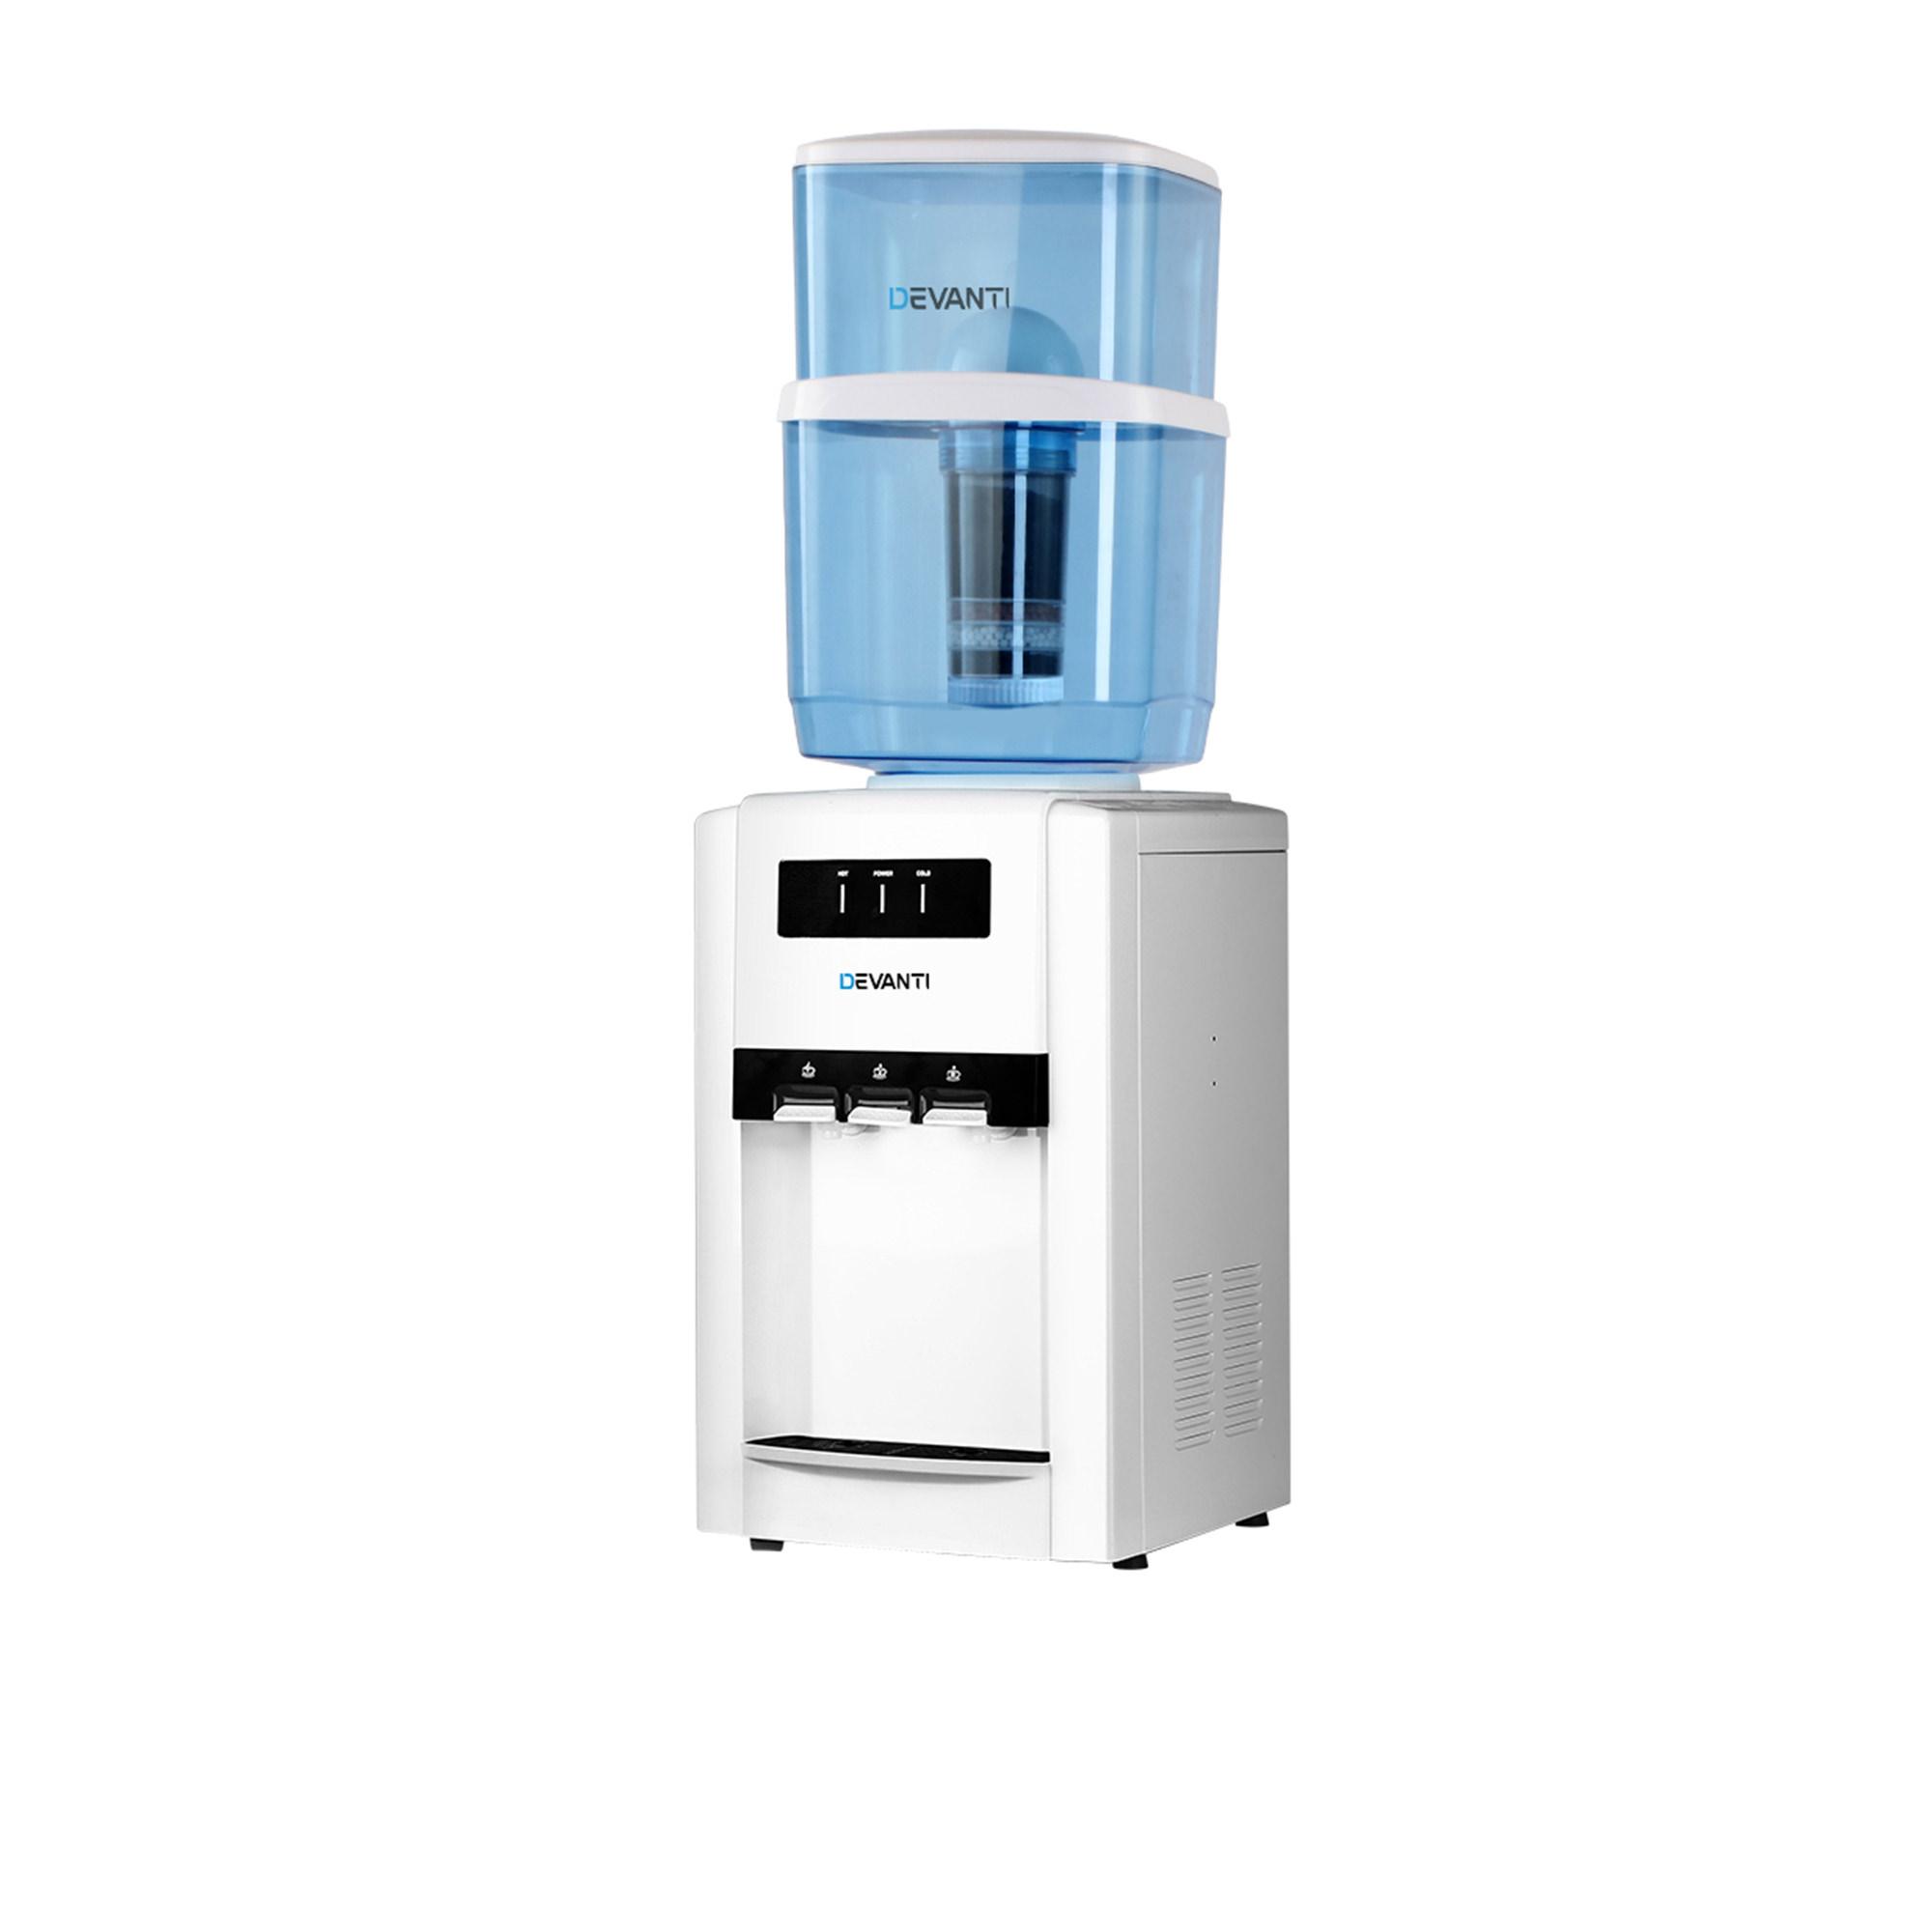 Devanti Benchtop Water Dispenser with 2 Spare Filters 22L Image 5